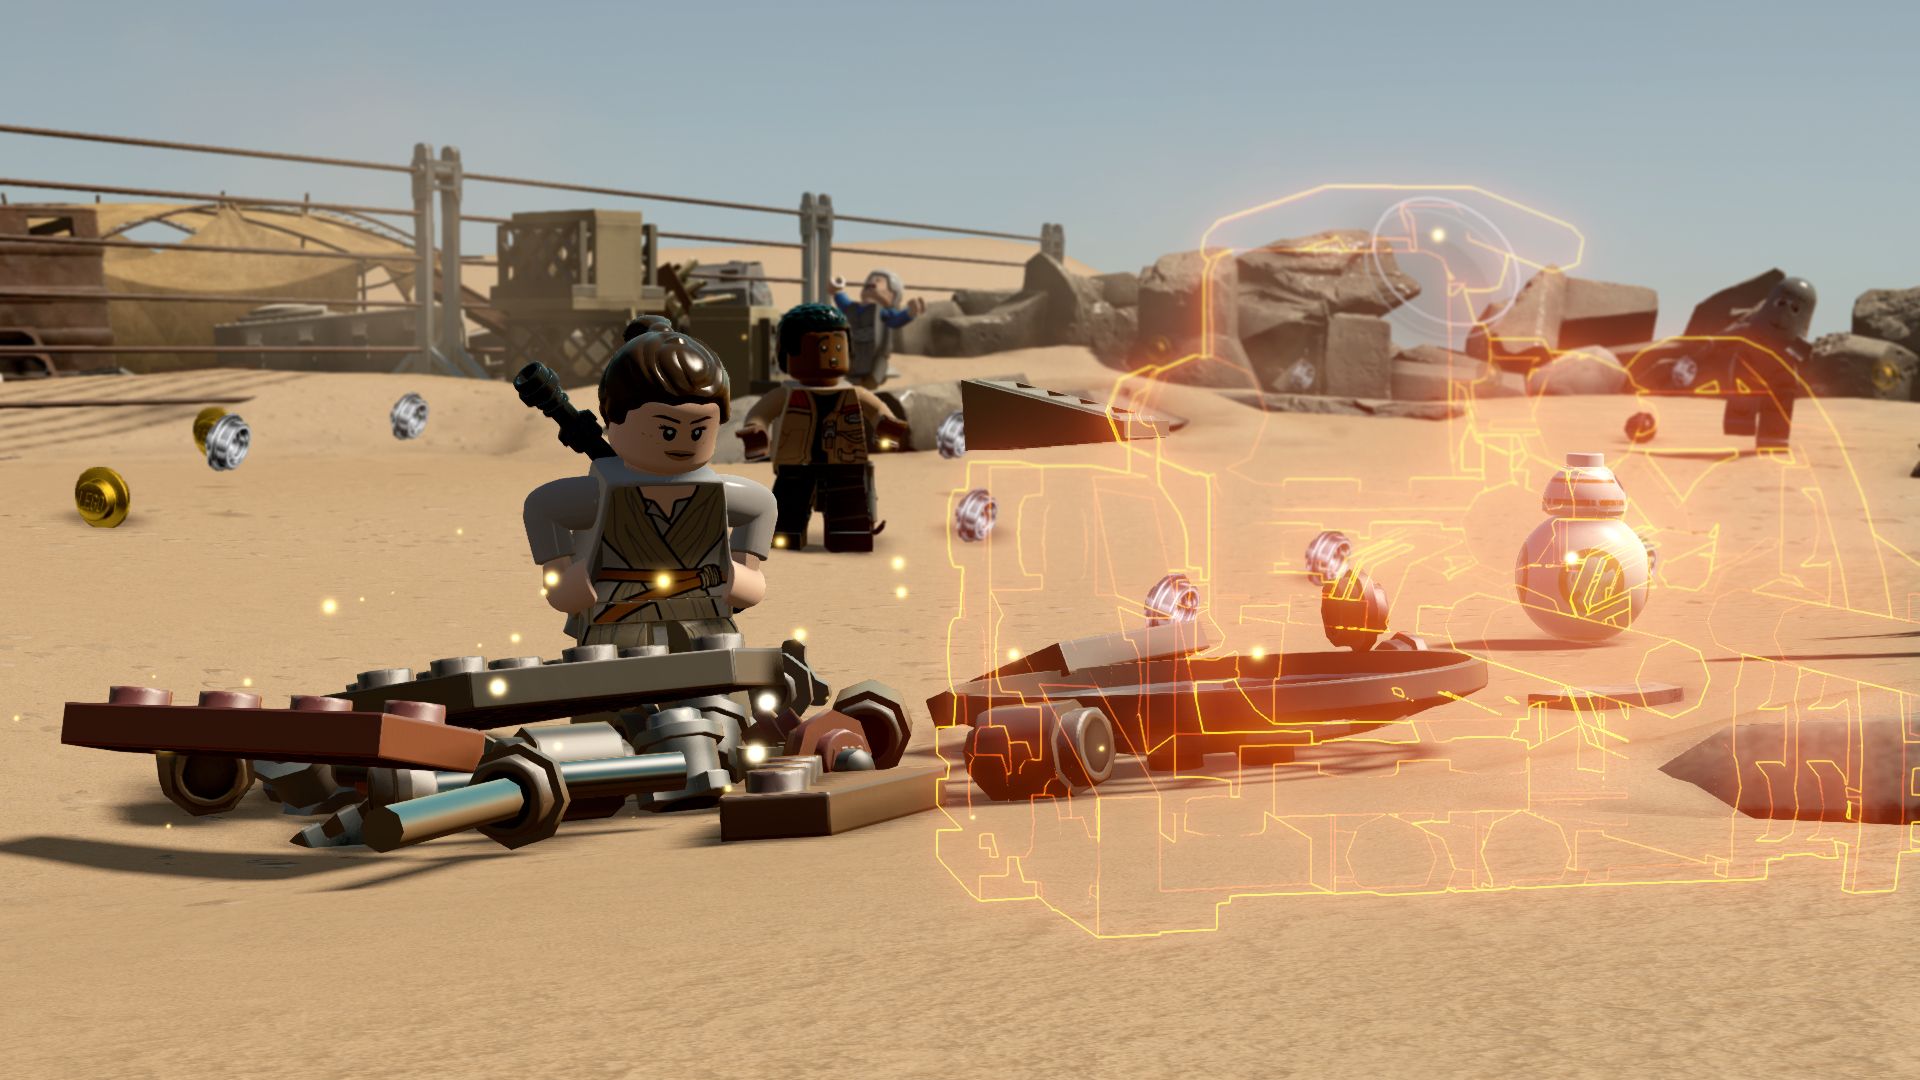 lego star wars the force awakens review image 4